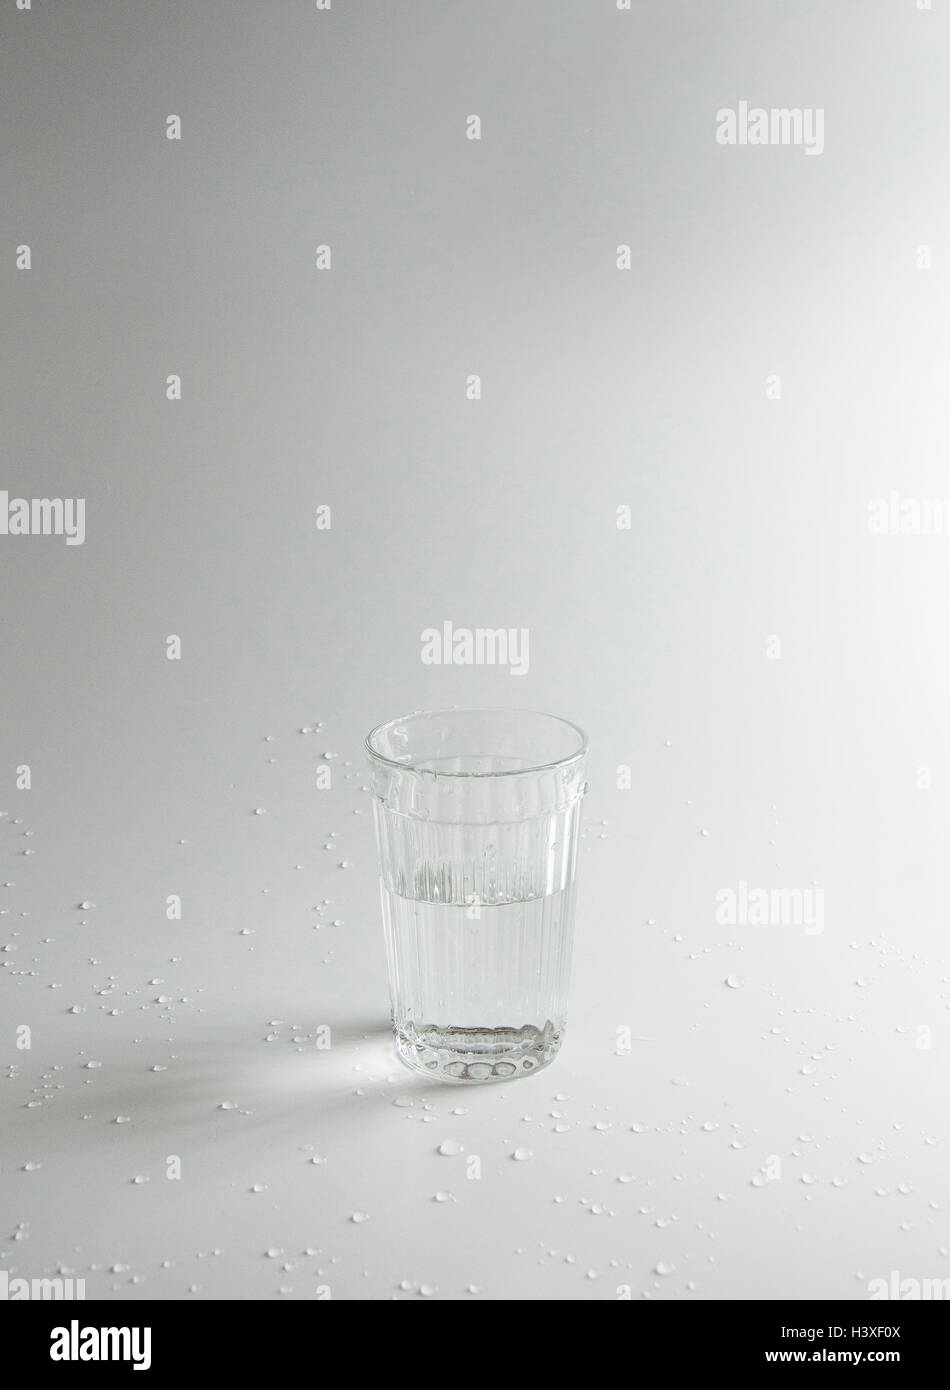 glass of water on light background Stock Photo